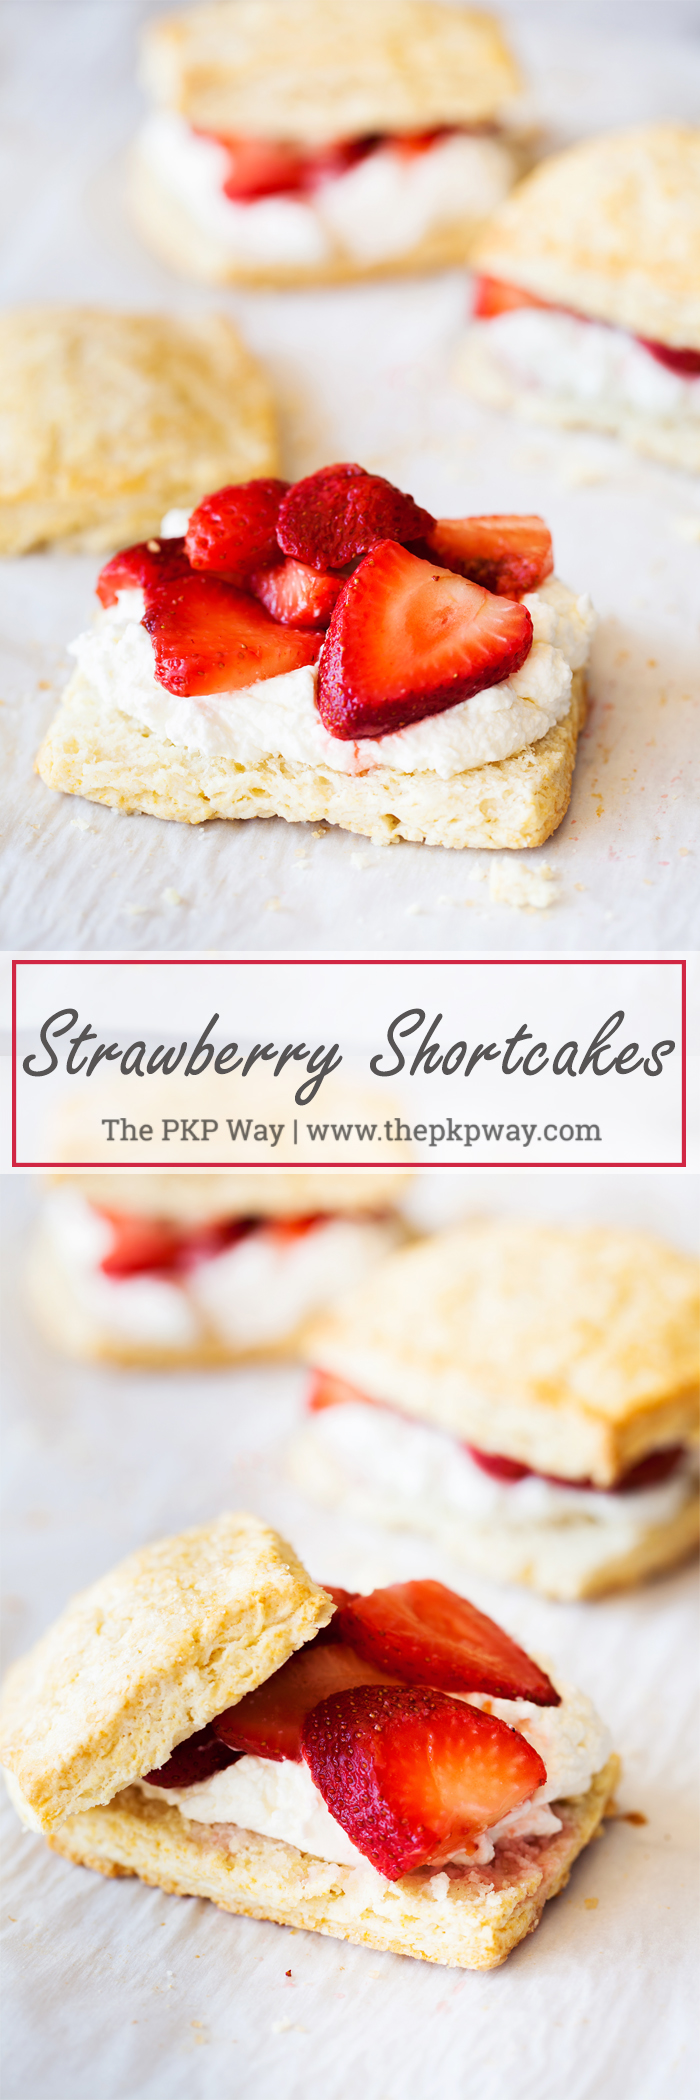 This classic strawberry shortcake recipe combines tender and flaky shortcakes with fluffy whipped cream and juicy strawberries.